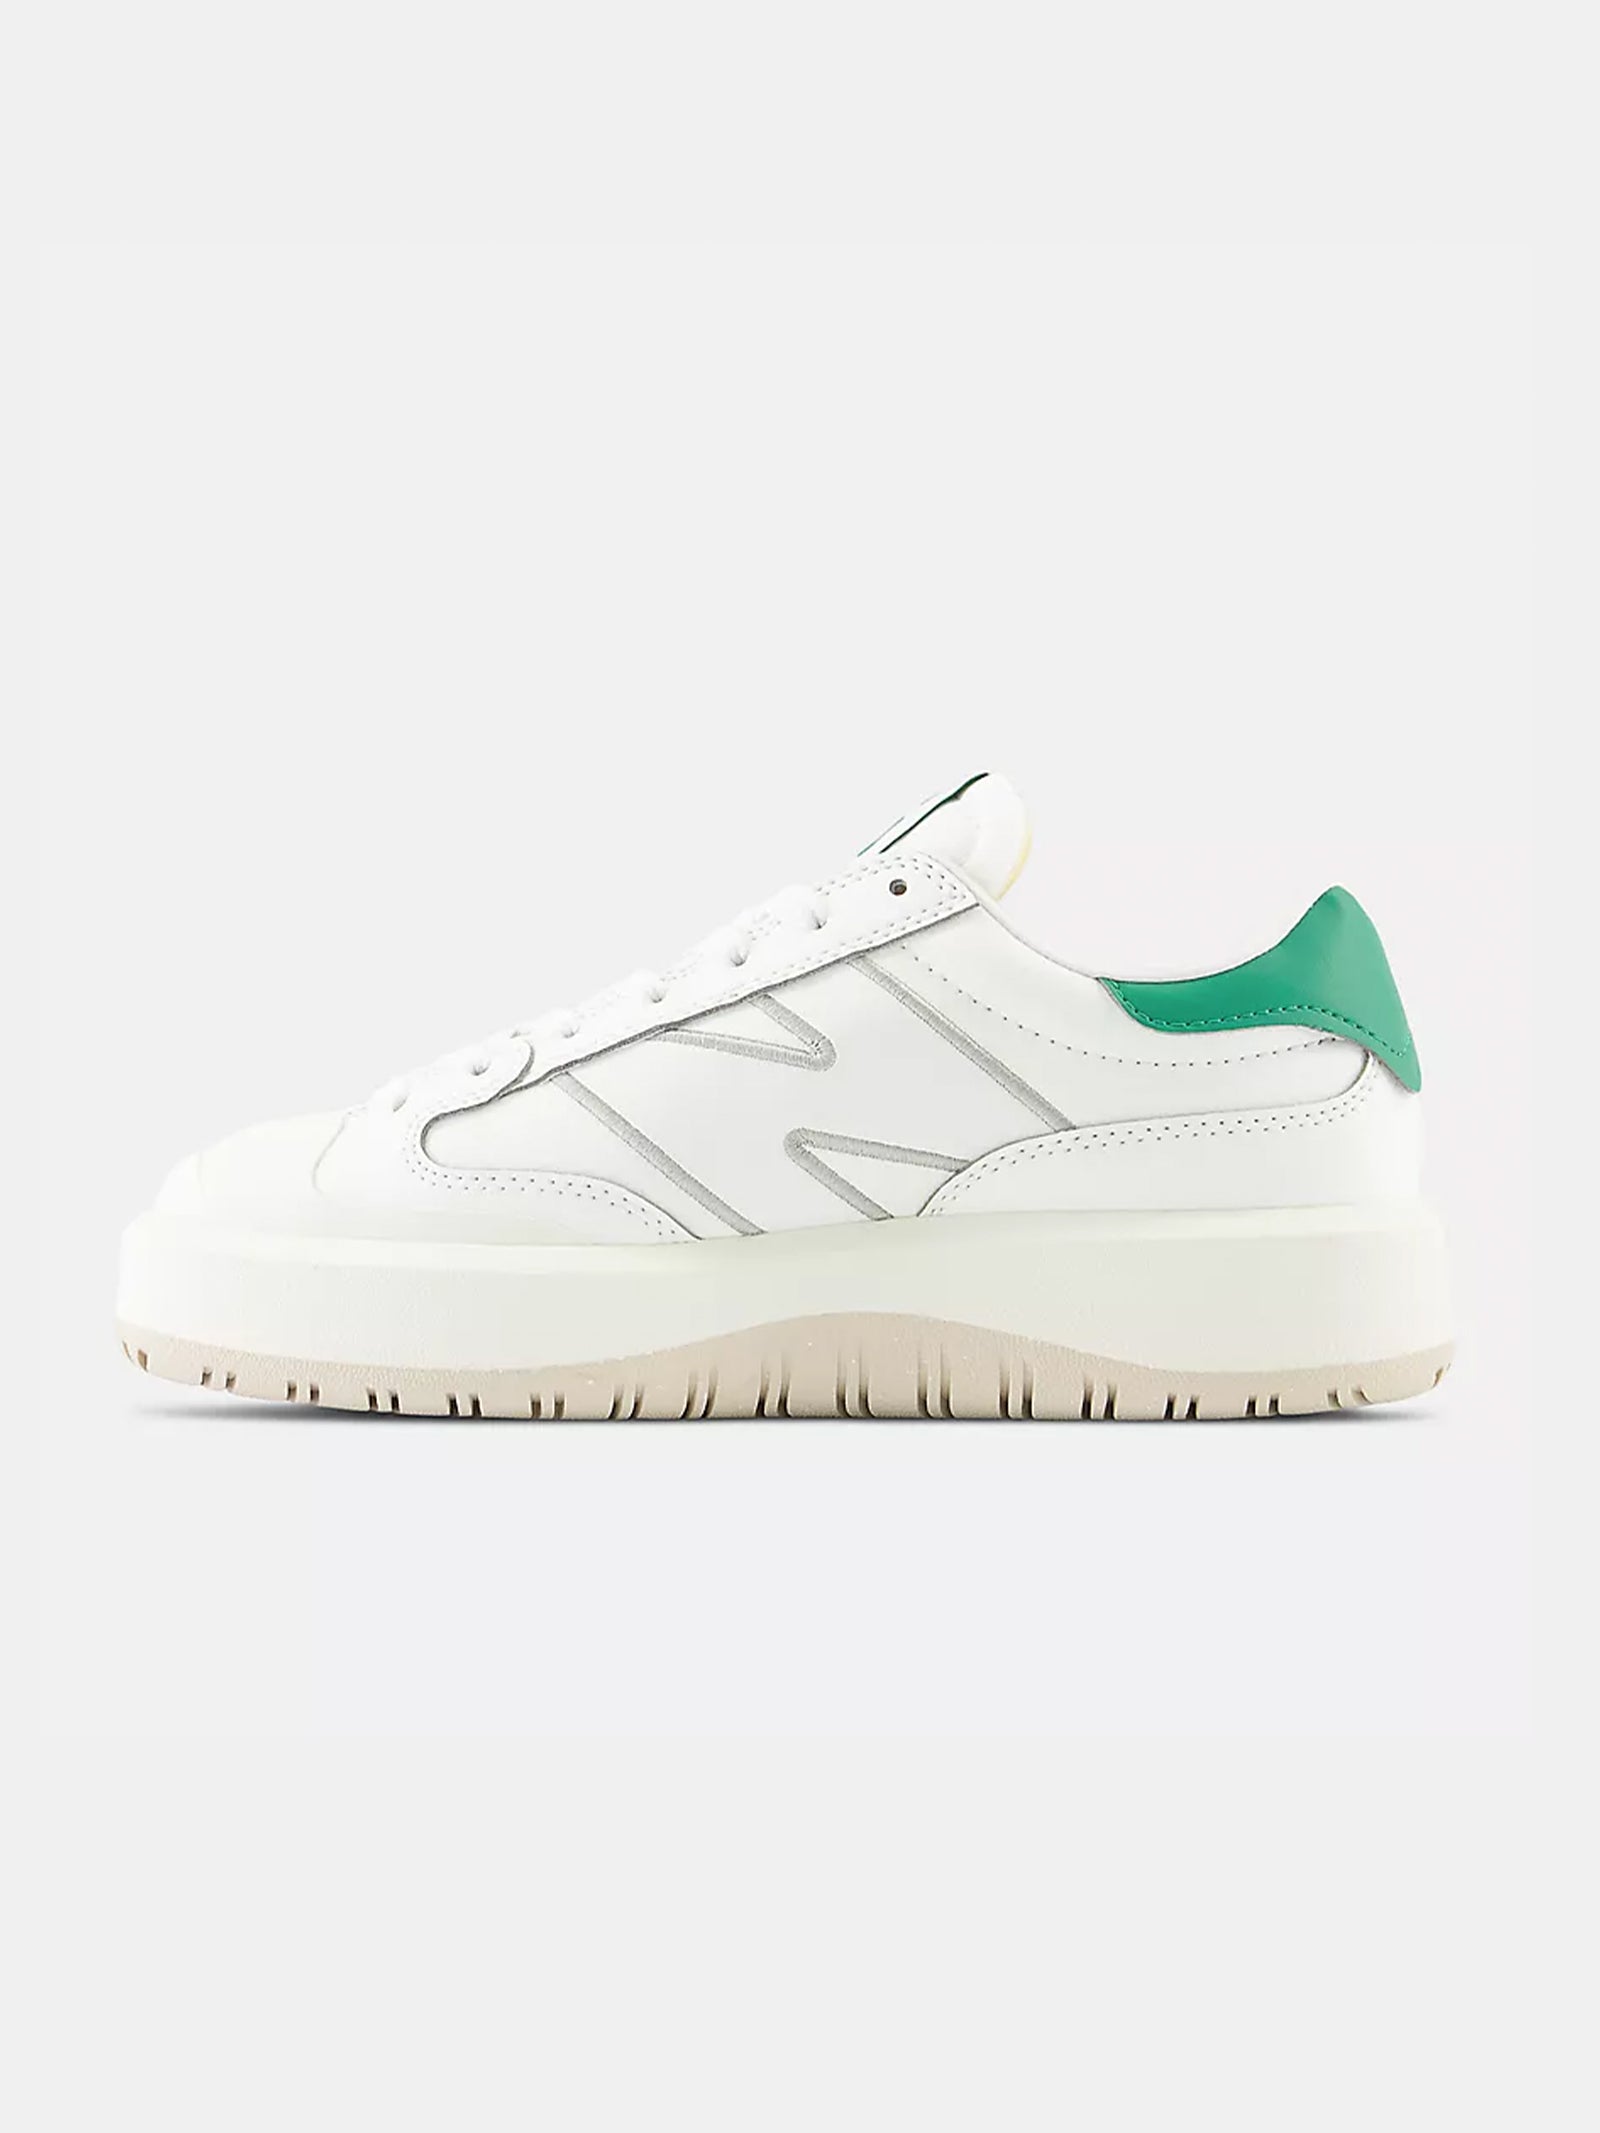 Unisex CT302 Sneakers in White & Green - Glue Store